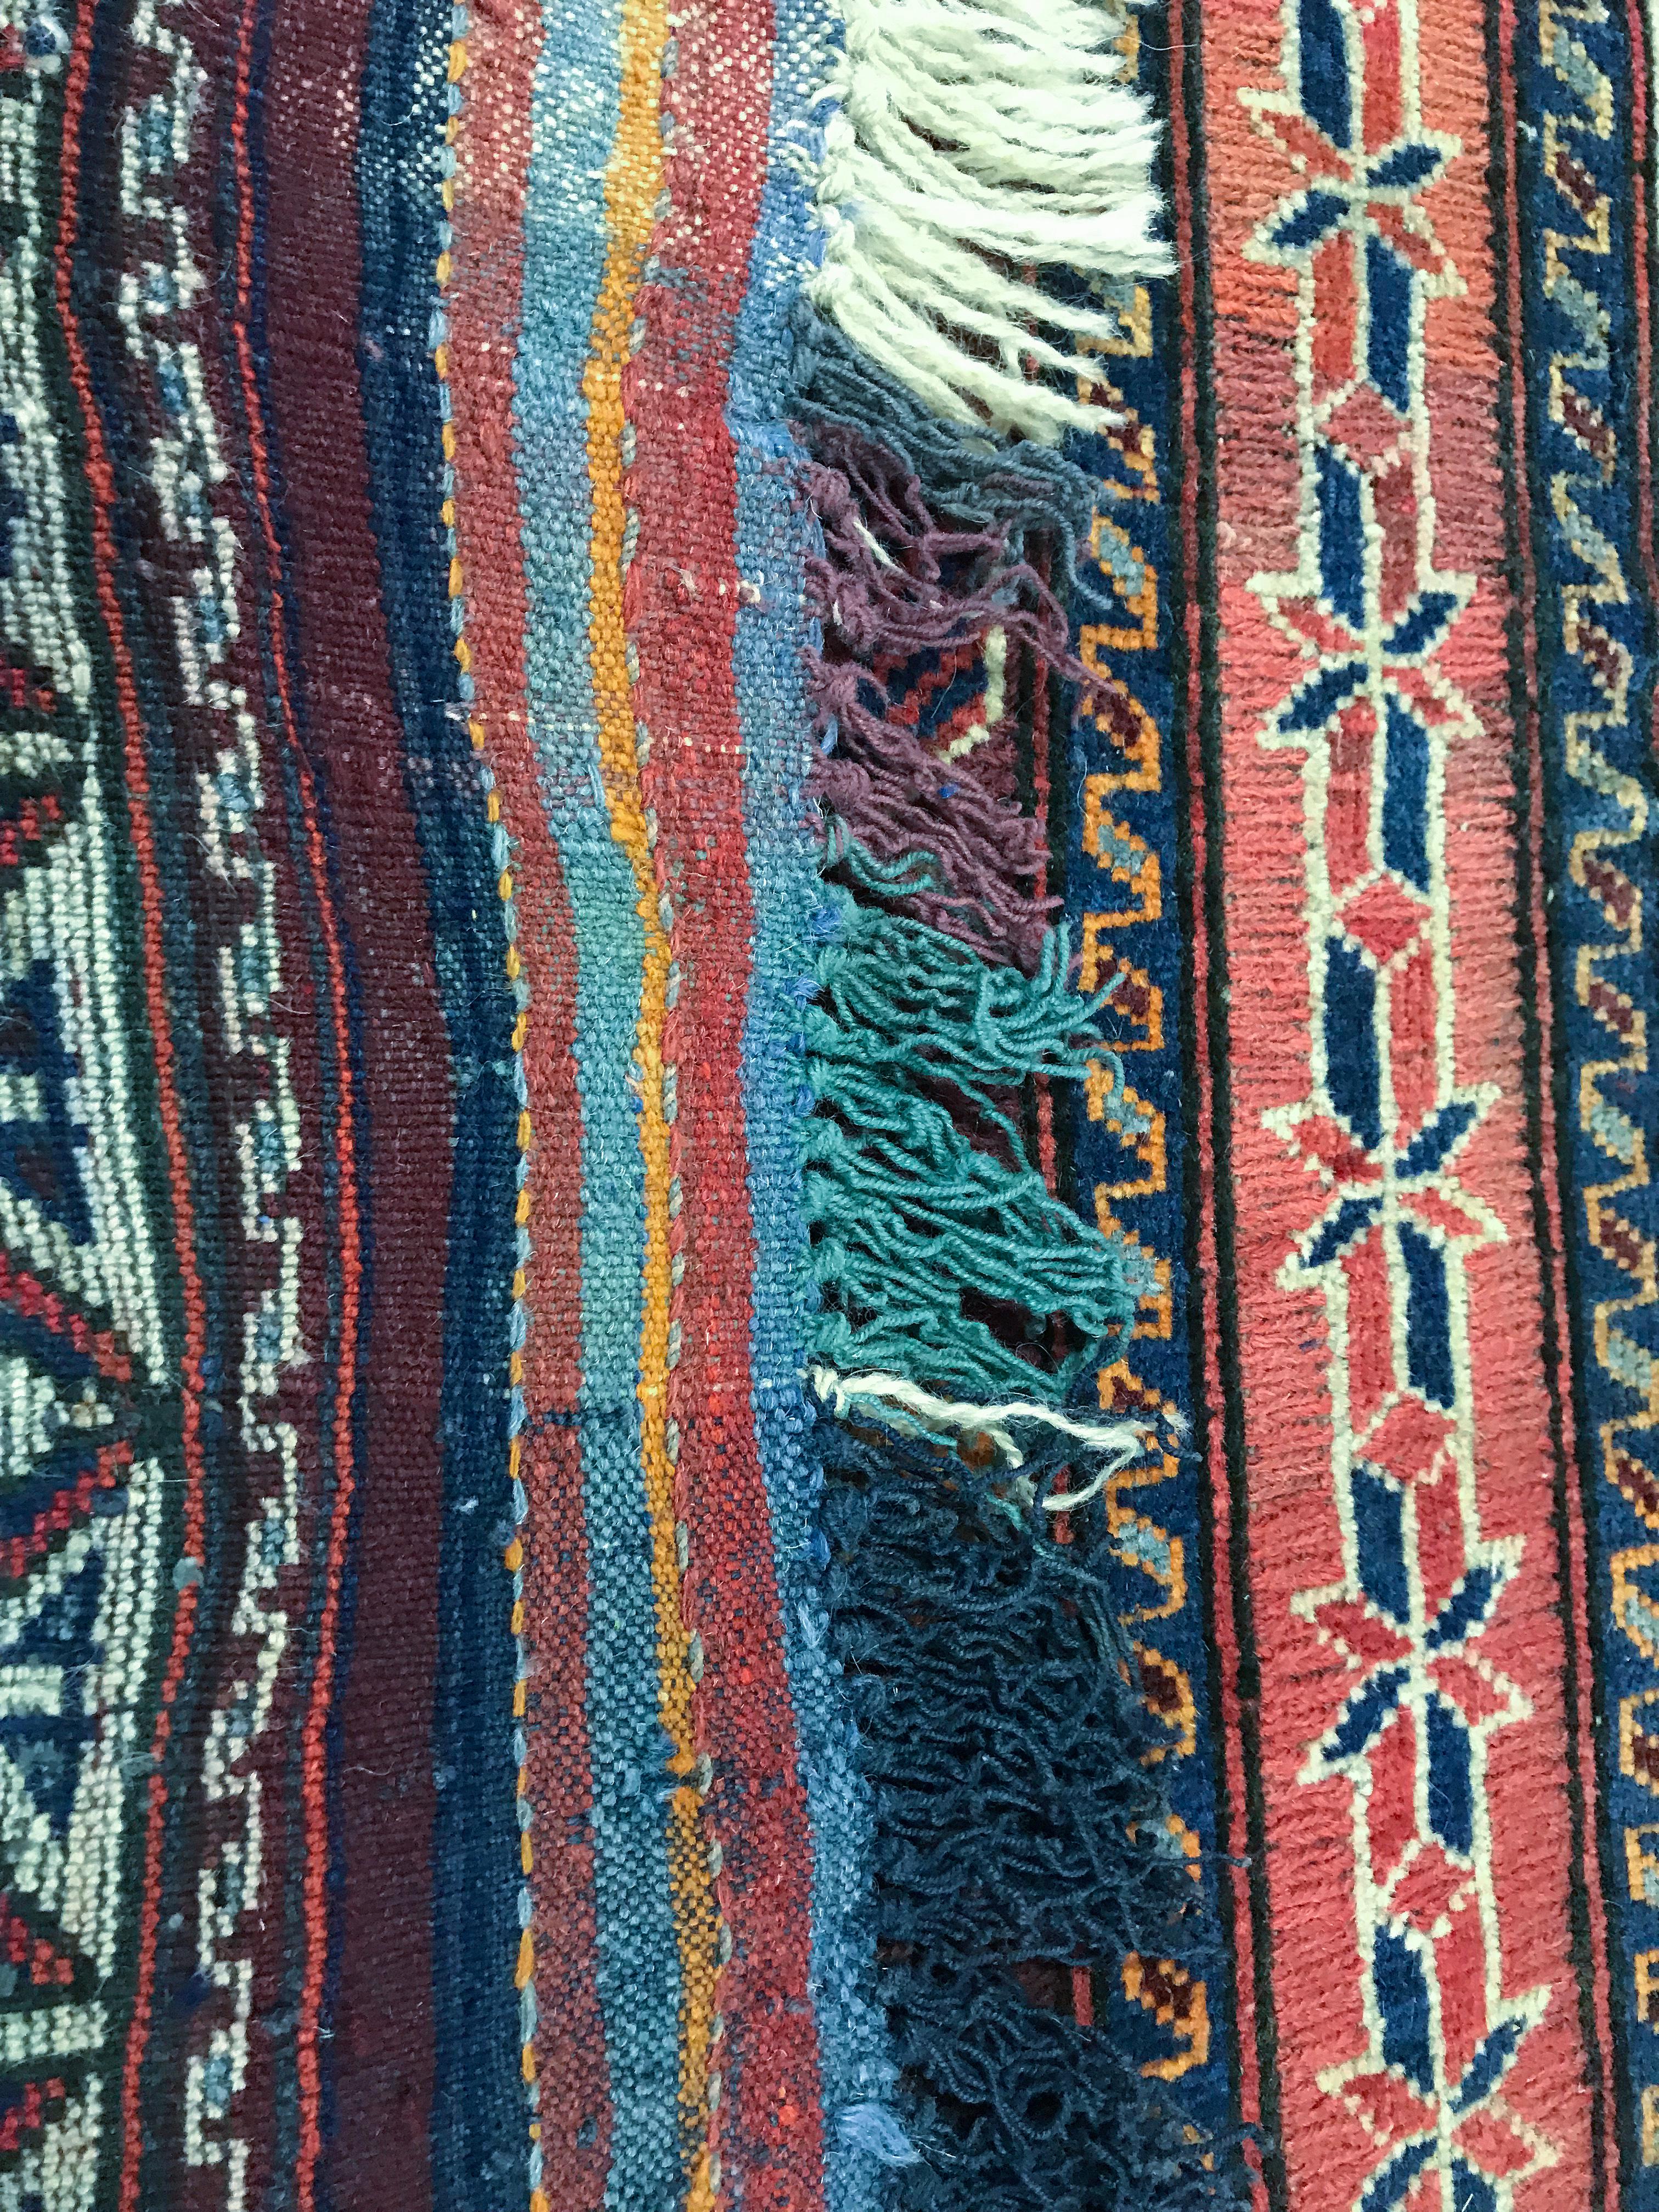 Based on authentic Oriental designs and using only the finest of wool's, these handwoven rugs are truly timeless classics. These traditional styles reflect the Classic patterns that have created the most beautiful of decors over the centuries.